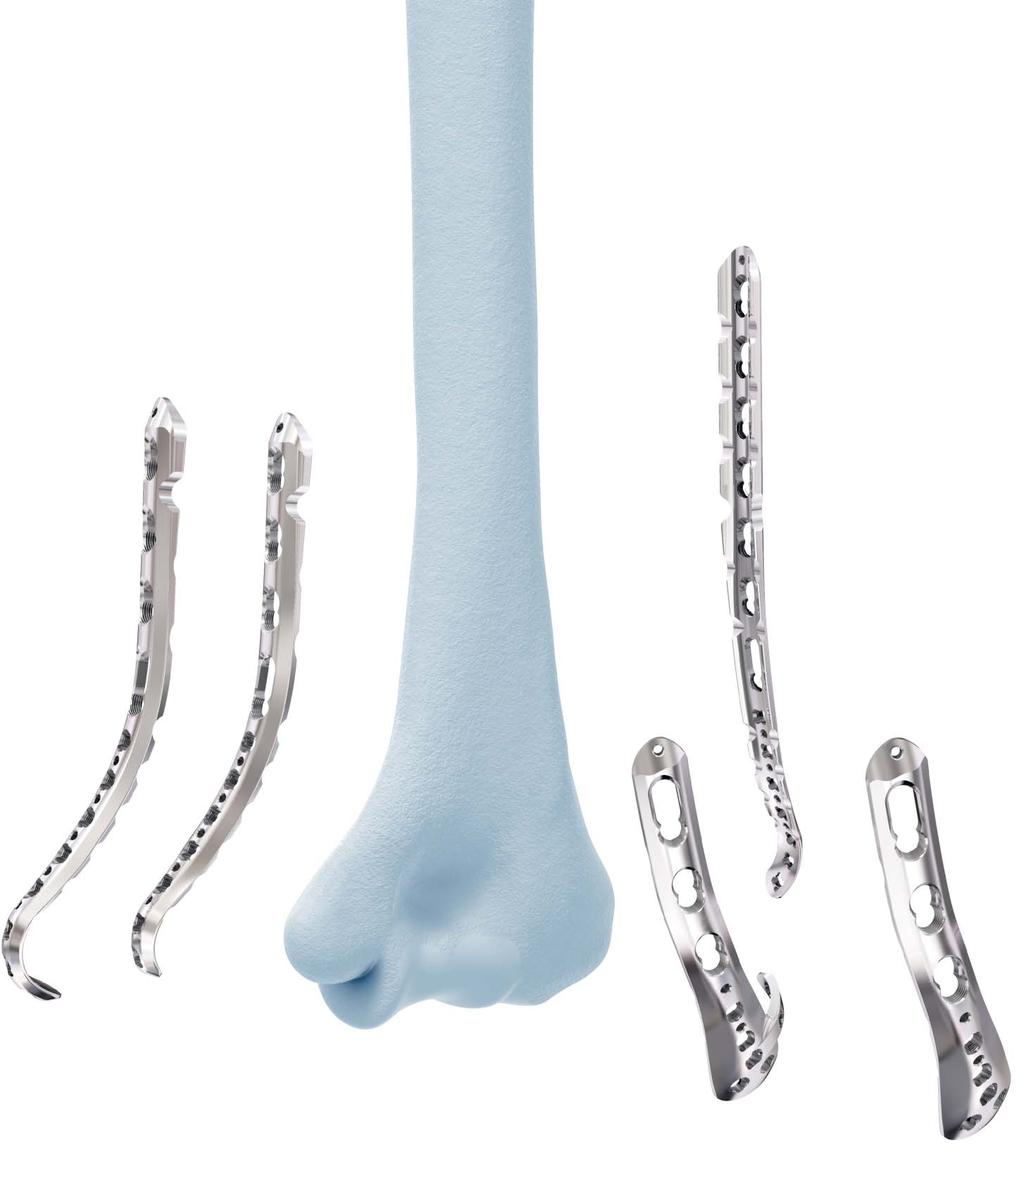 VA-LCP Distal Humerus Plates The plates offer multiple screw configurations for the medial and lateral columns, and the